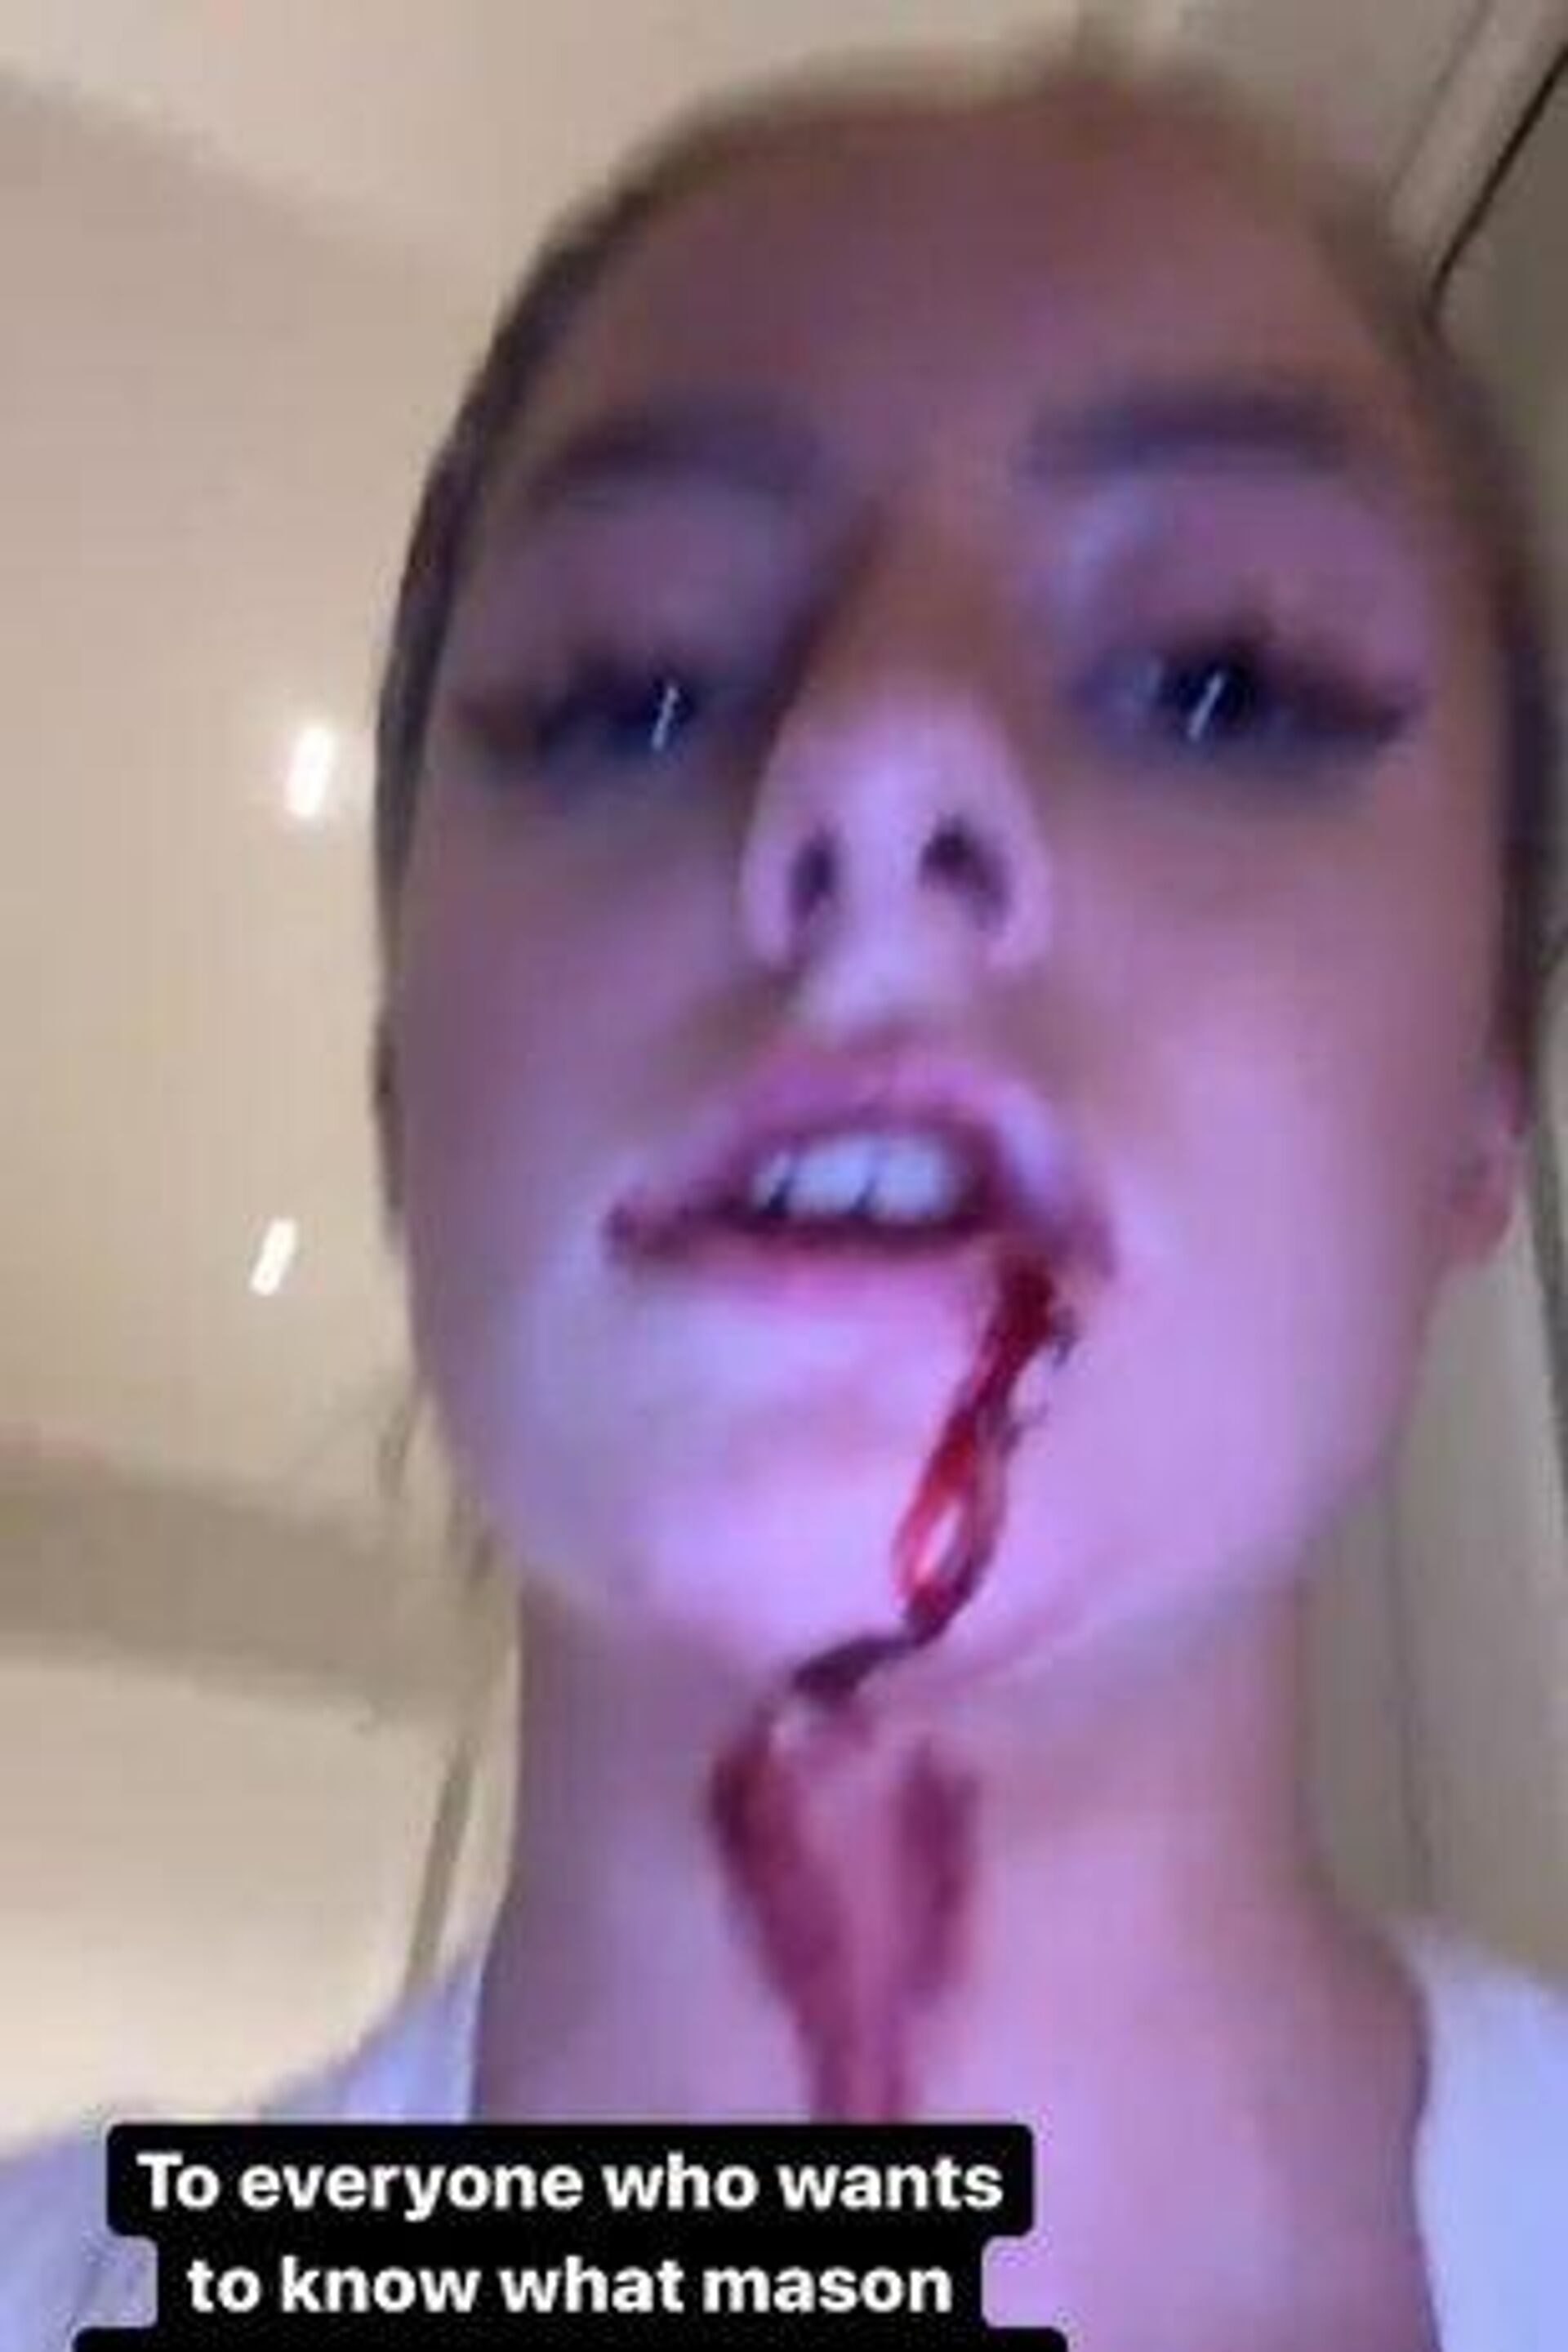 Screenshot of a deleted post published by Harriet Robson, depicting blood on her lip as she accuses her boyfriend Mason Greenwood of abuse. - Sputnik International, 1920, 30.01.2022